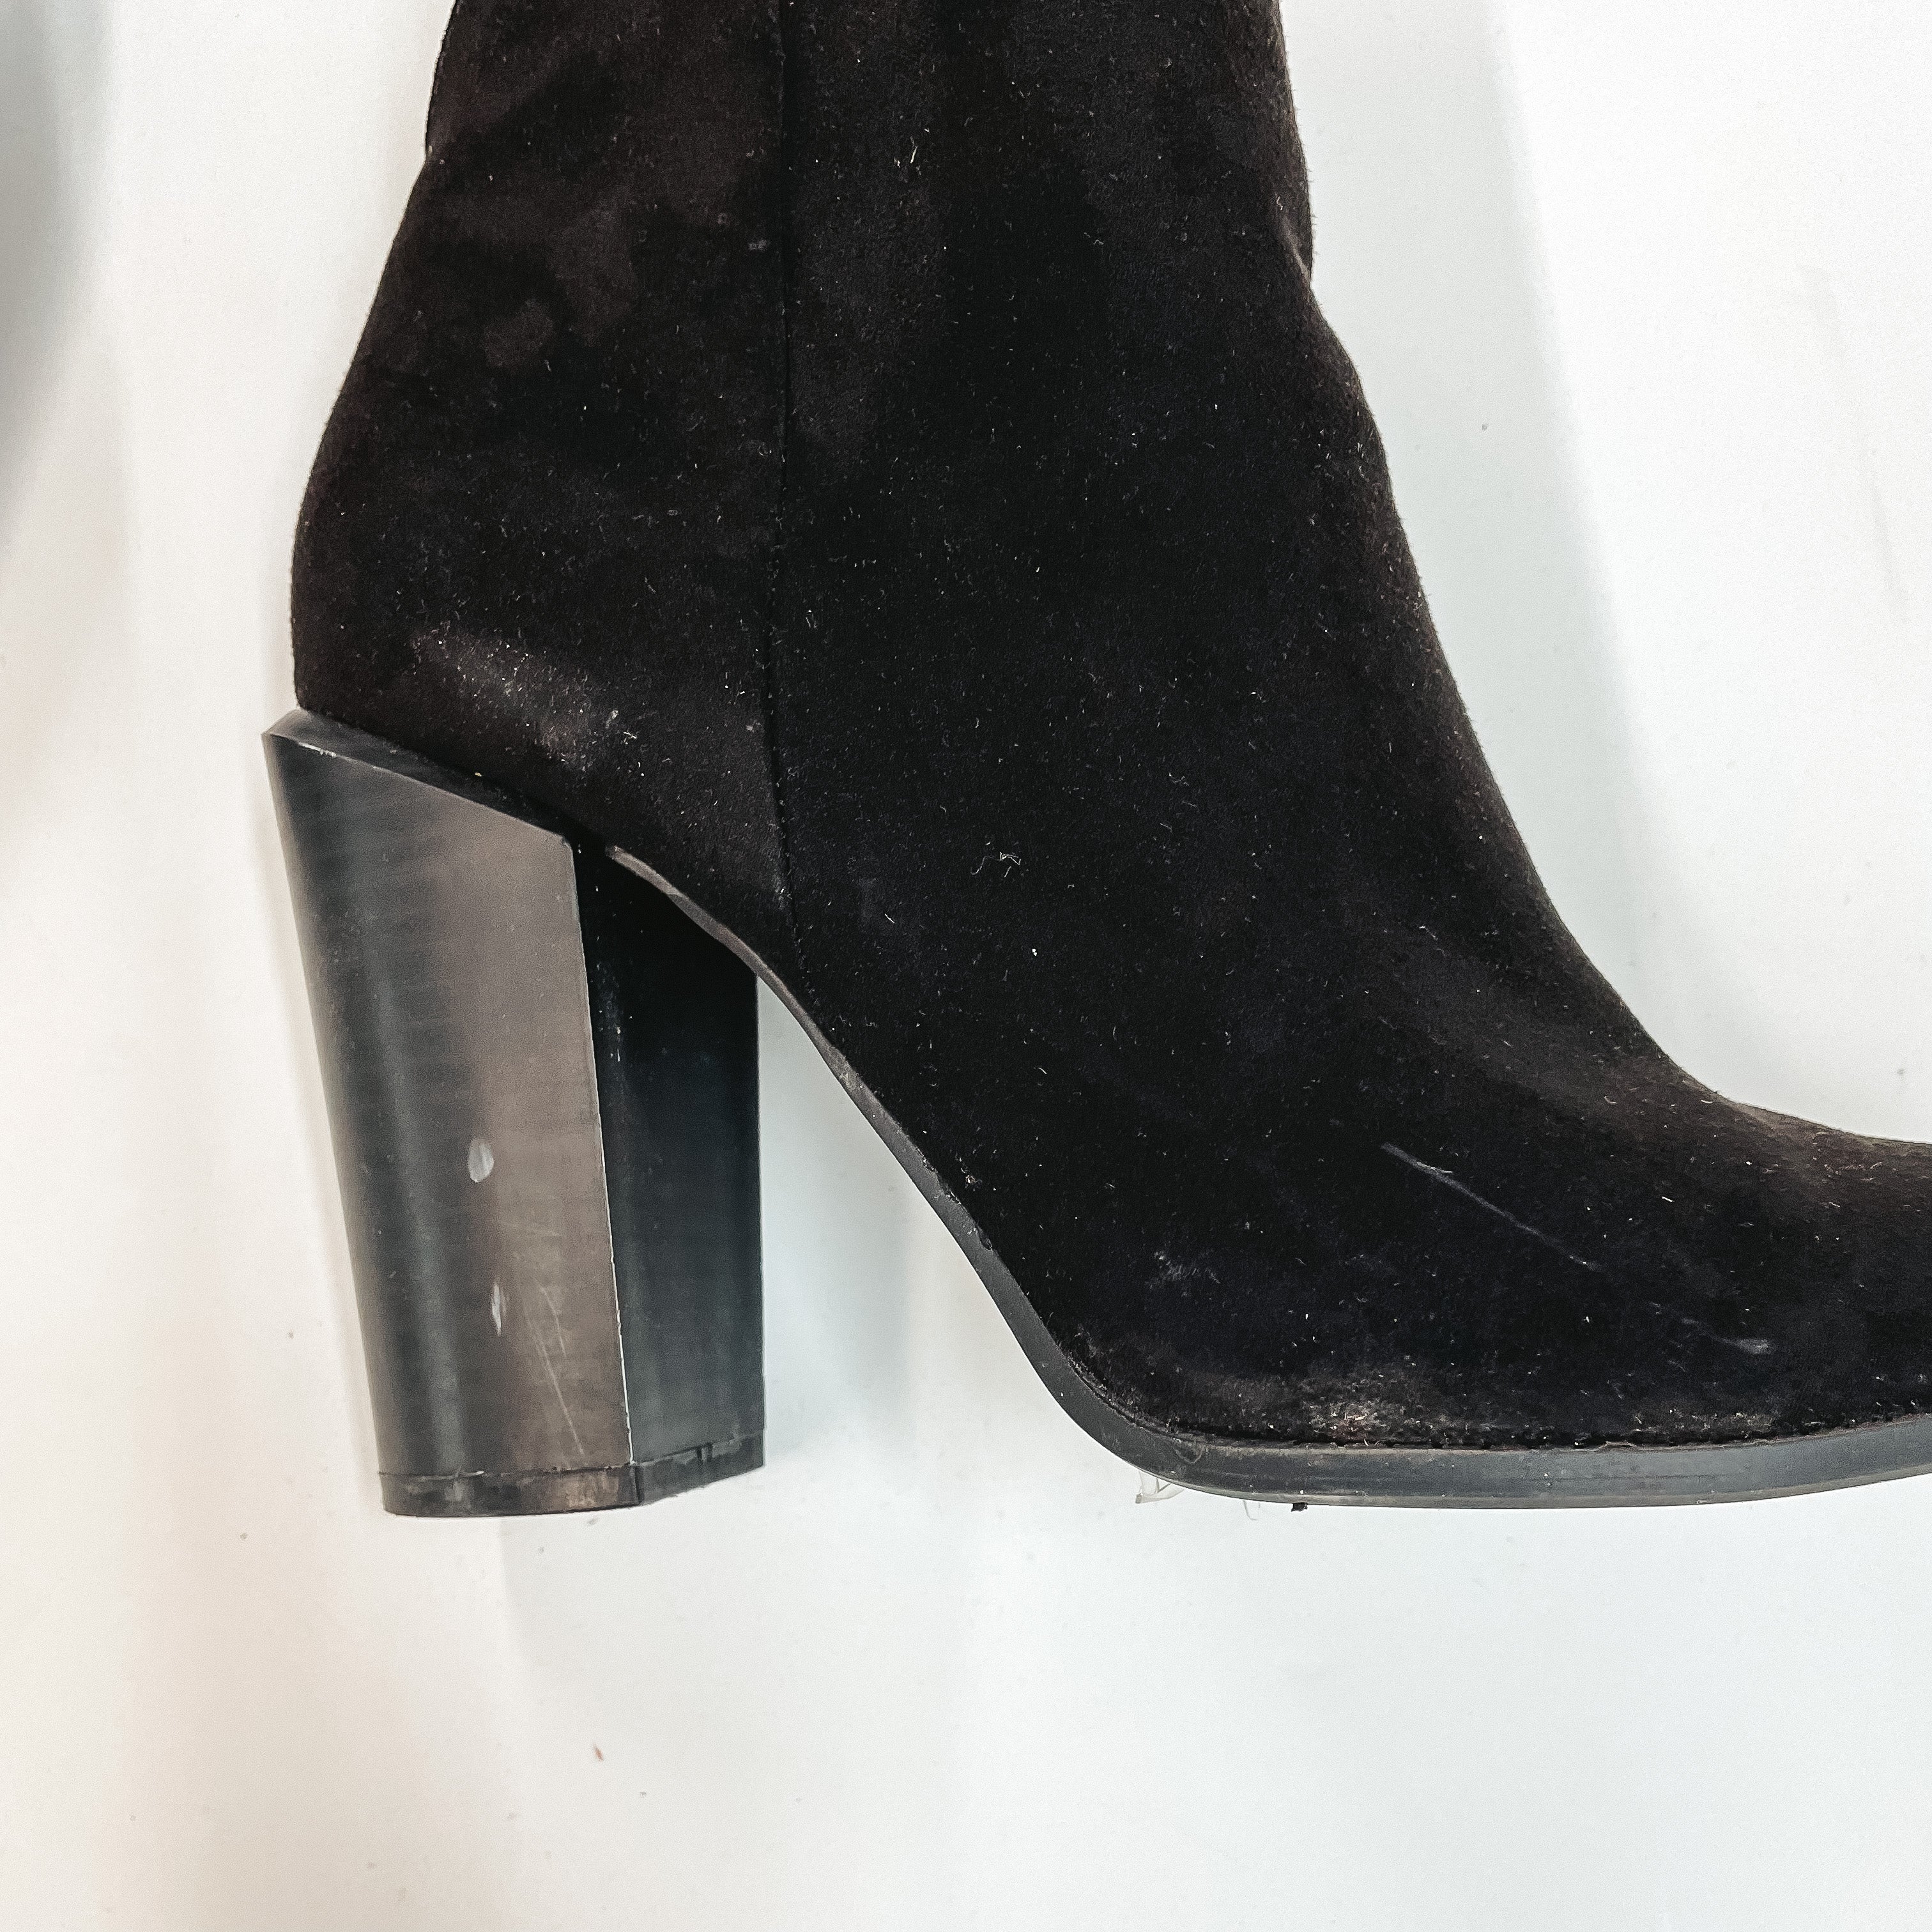 Model Shoes Size 9 | Walking By Side Zip Heeled Booties with Pointed Toe in Black - Giddy Up Glamour Boutique